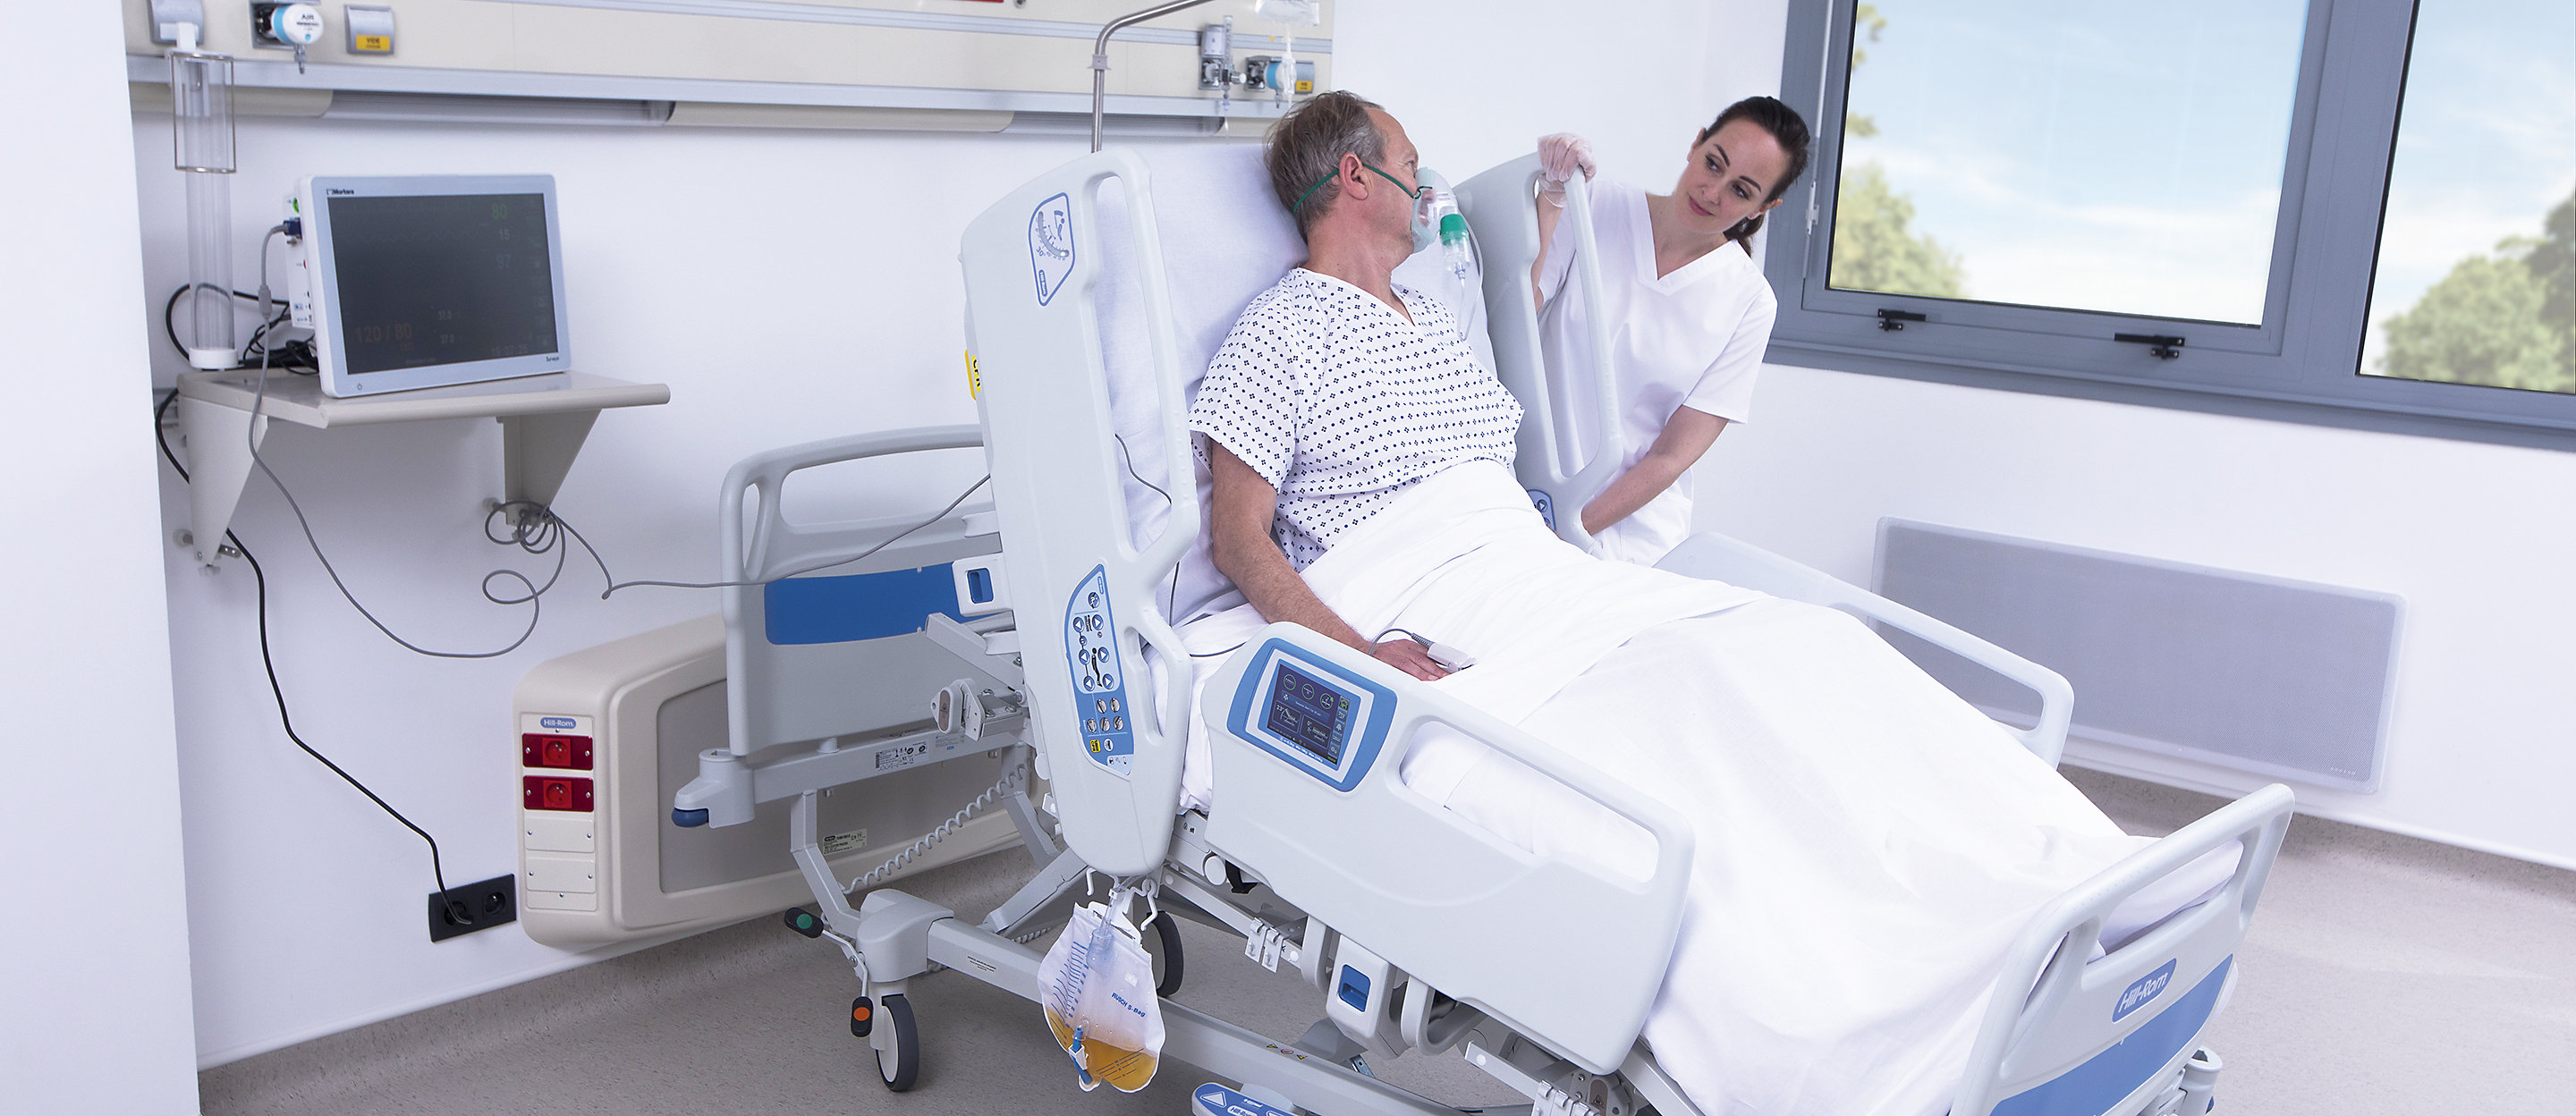 A clinician adjusts the Hillrom 900 Accella Smart Bed for a patient